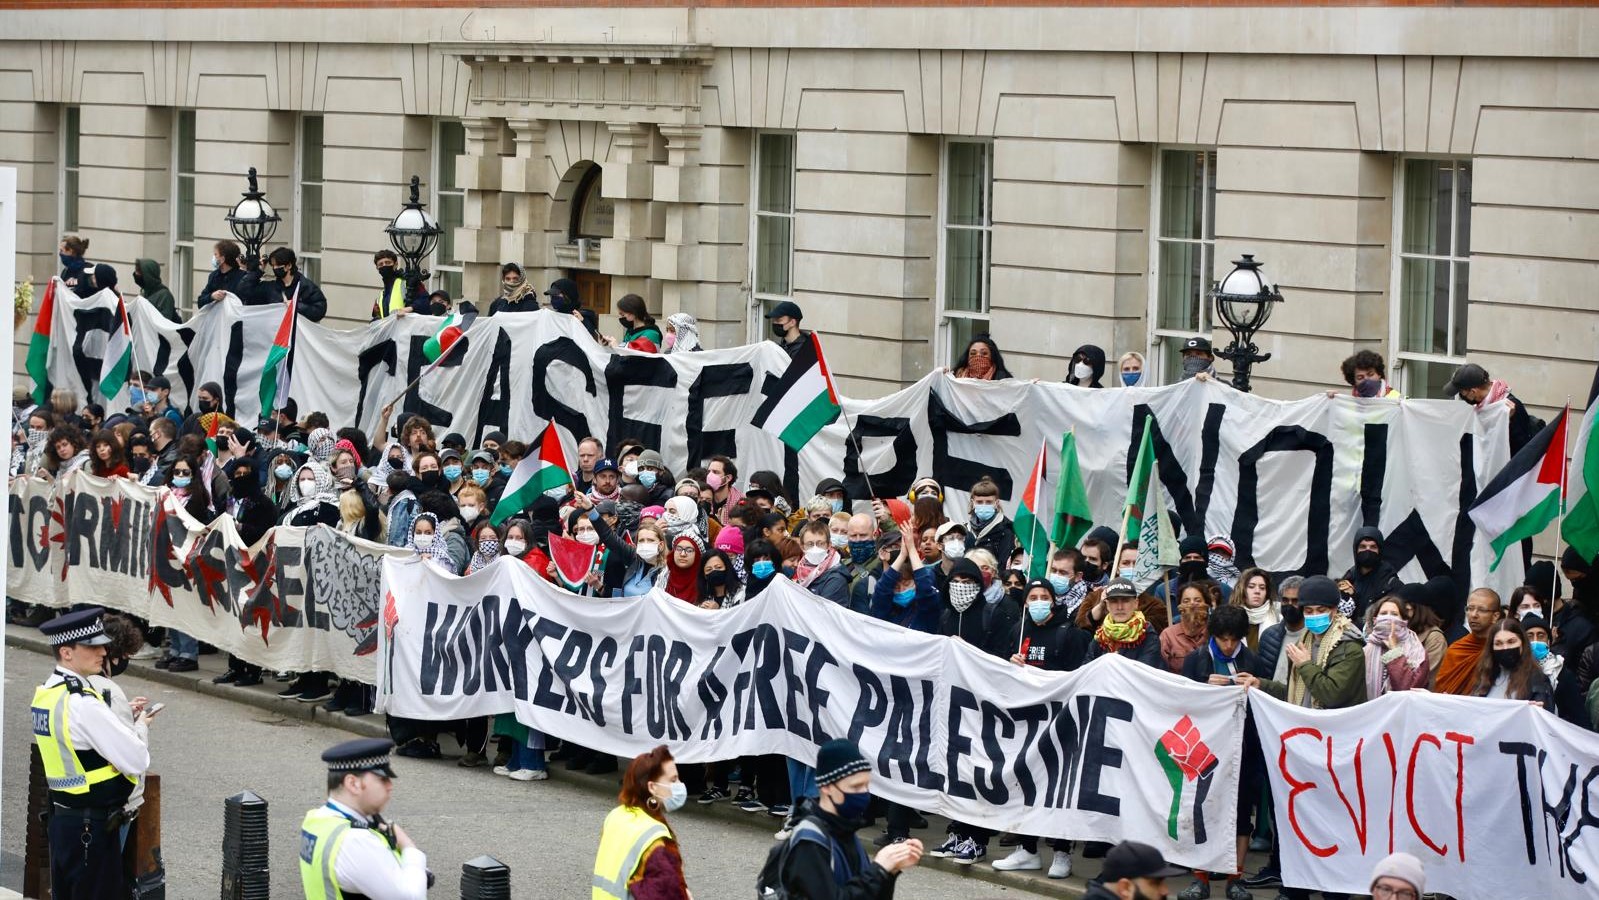 Hundreds of workers blocked the entrance to the Department of Business and Trade to oppose the UK's arms sales to Israel (Supplied)